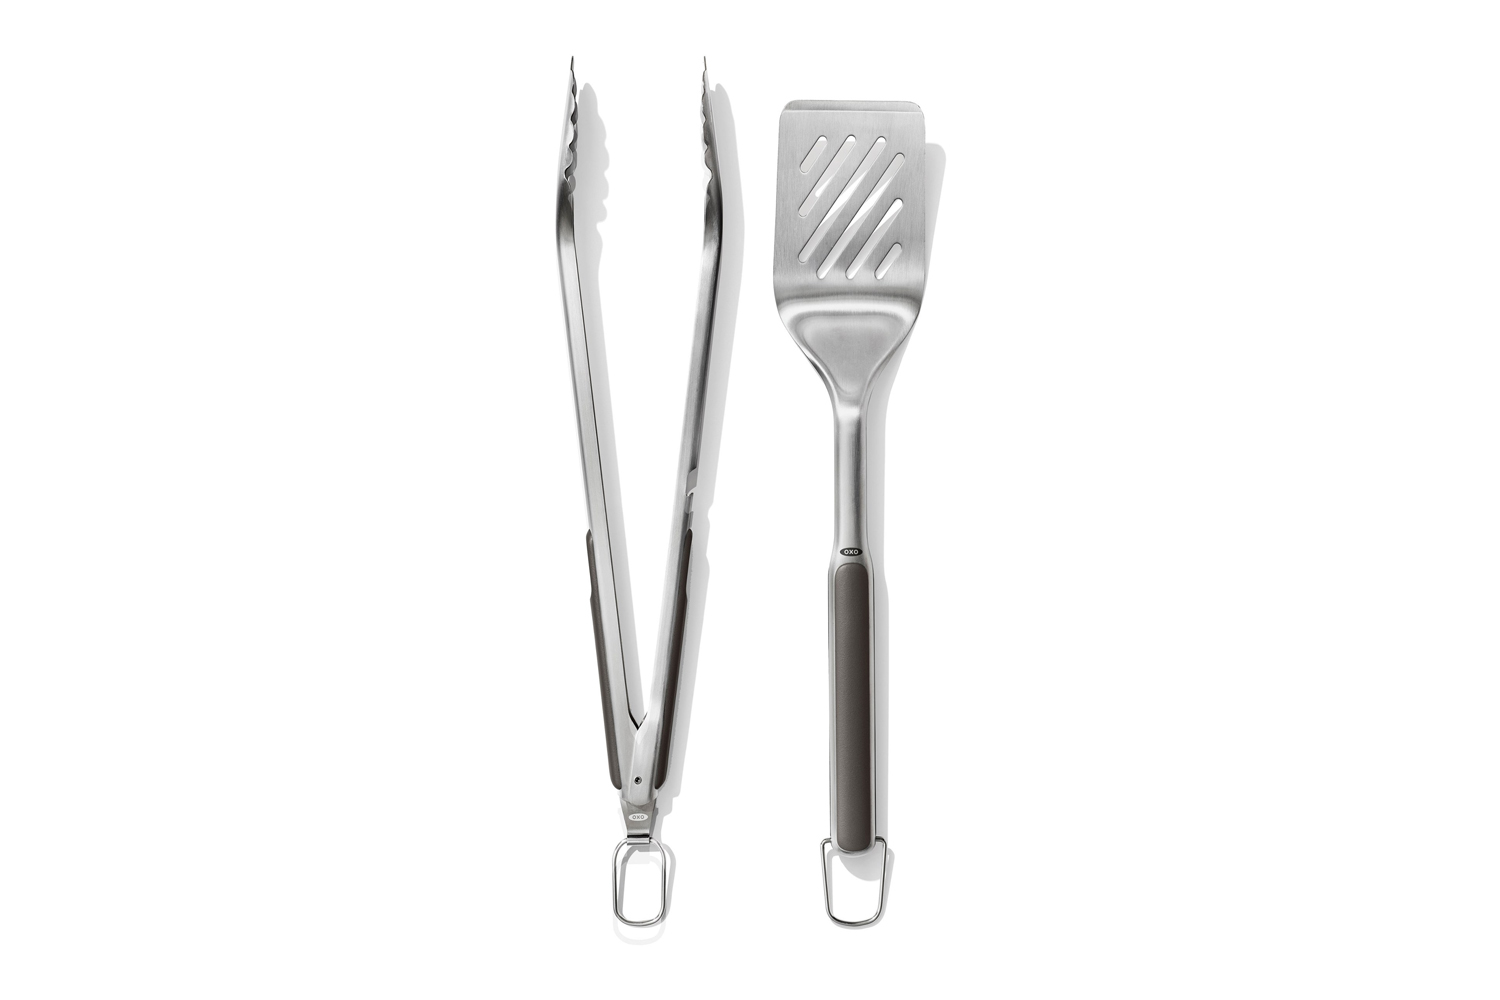 https://www.themanual.com/wp-content/uploads/sites/9/2021/12/oxo-turner-and-tongs-set.jpg?fit=800%2C800&p=1